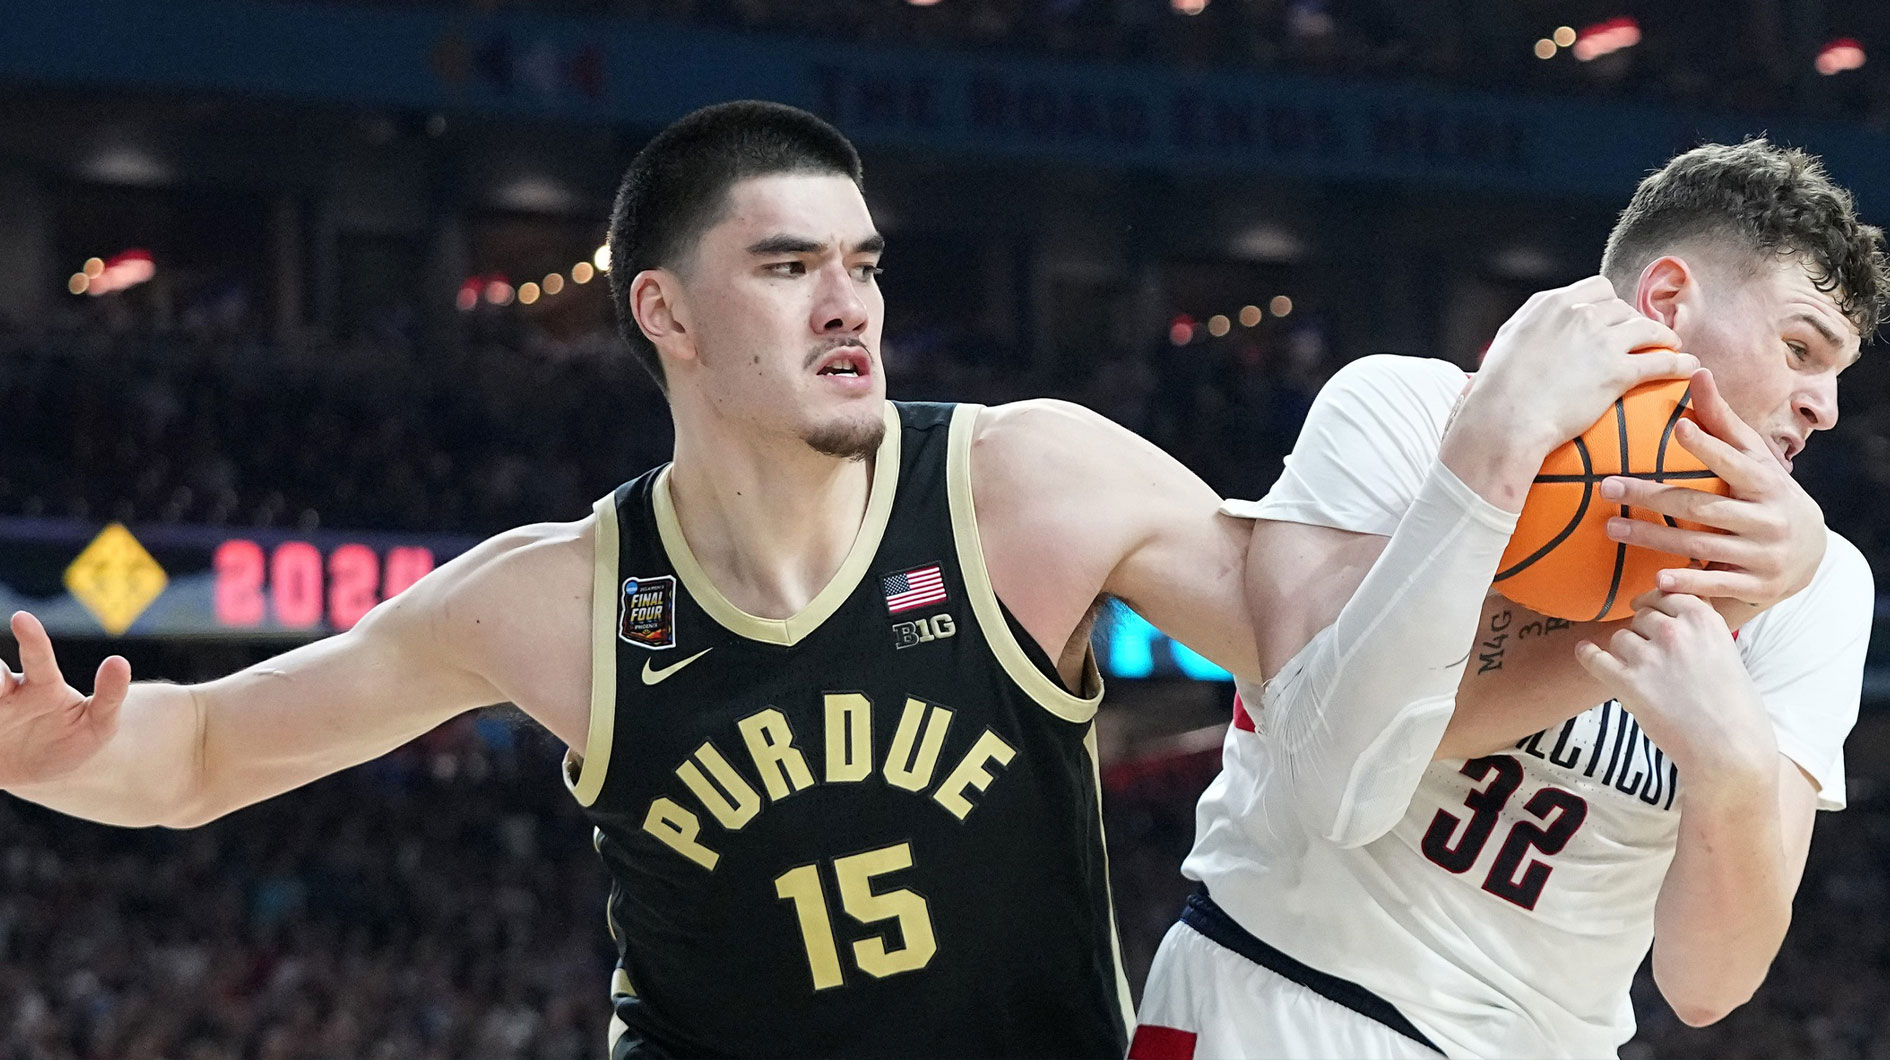 [NBA Draft] Purdue Boilermakers center Zach Edey (15) and Connecticut Huskies center Donovan Clingan (32) fight for a rebound during the NCAA Men’s Basketball Tournament Championship, Monday, April 8, 2024, at State Farm Stadium in Glendale, Ariz.